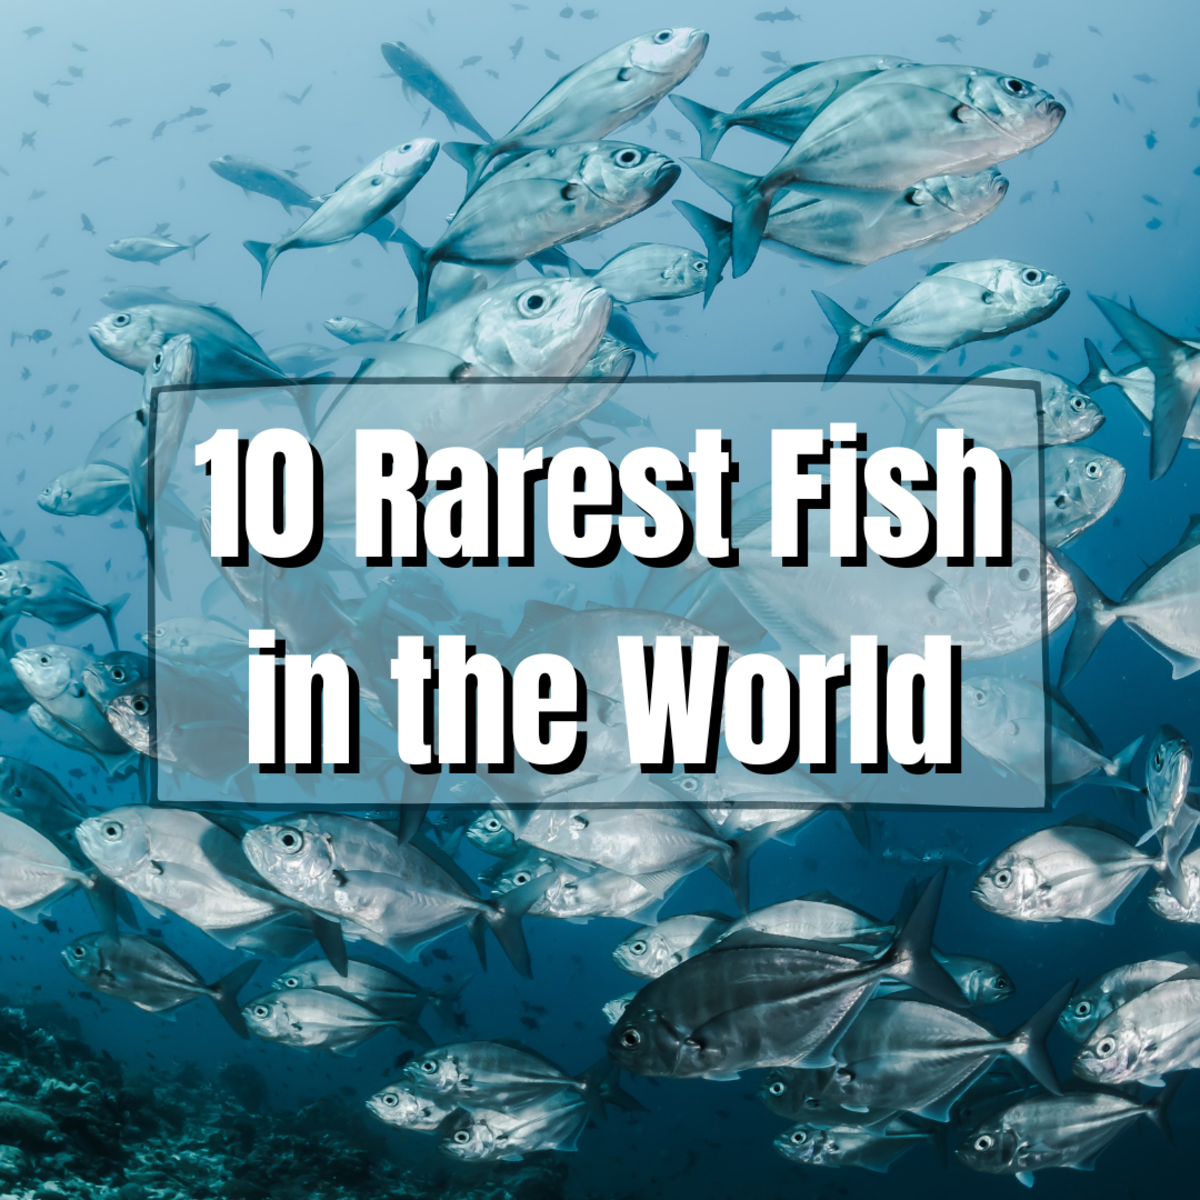 10 Rarest Fish in the World